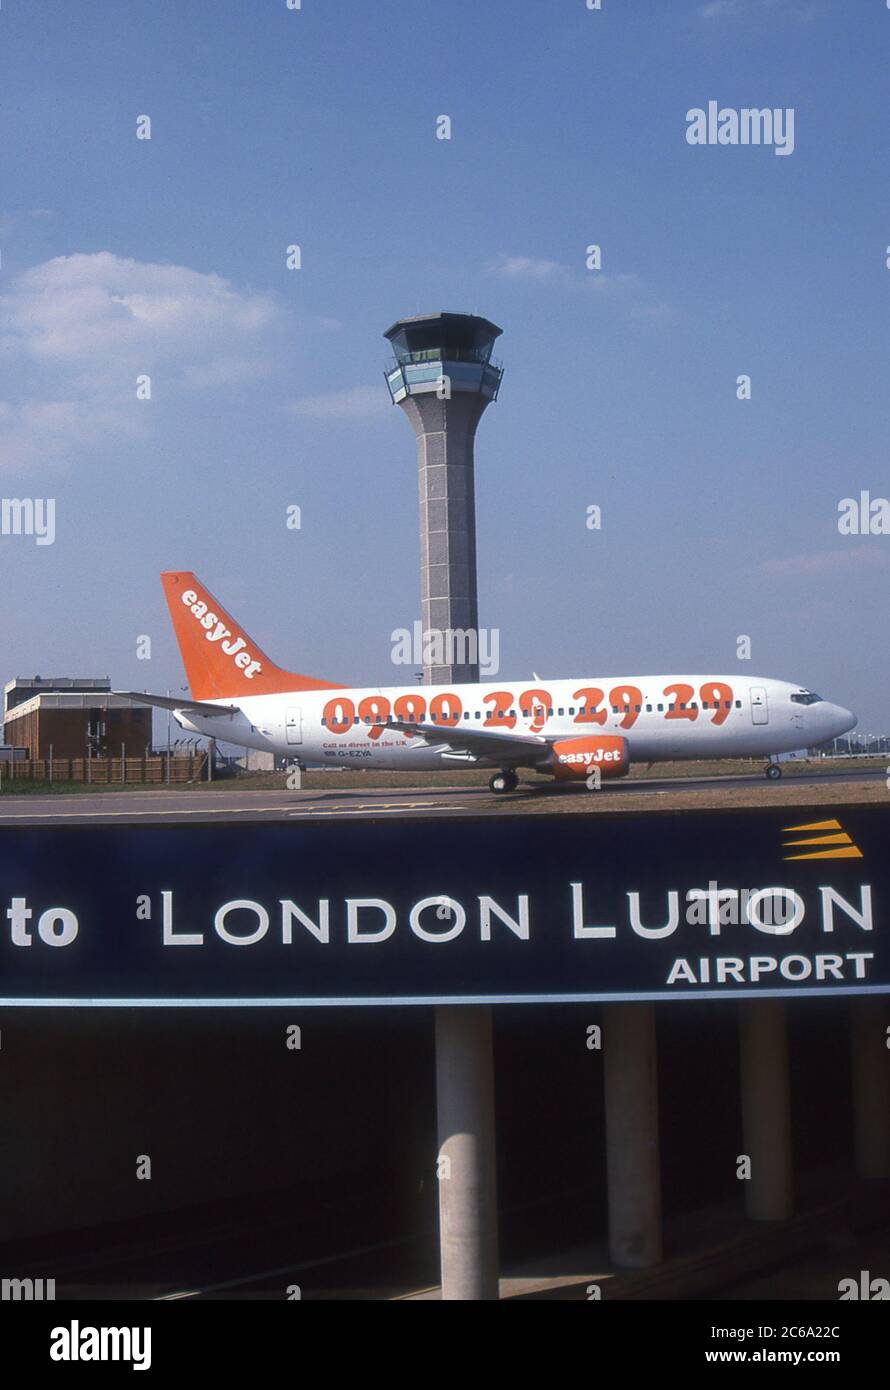 LONDON LUTON AIRPORT AND EASYJET BOEING 737. Stock Photo